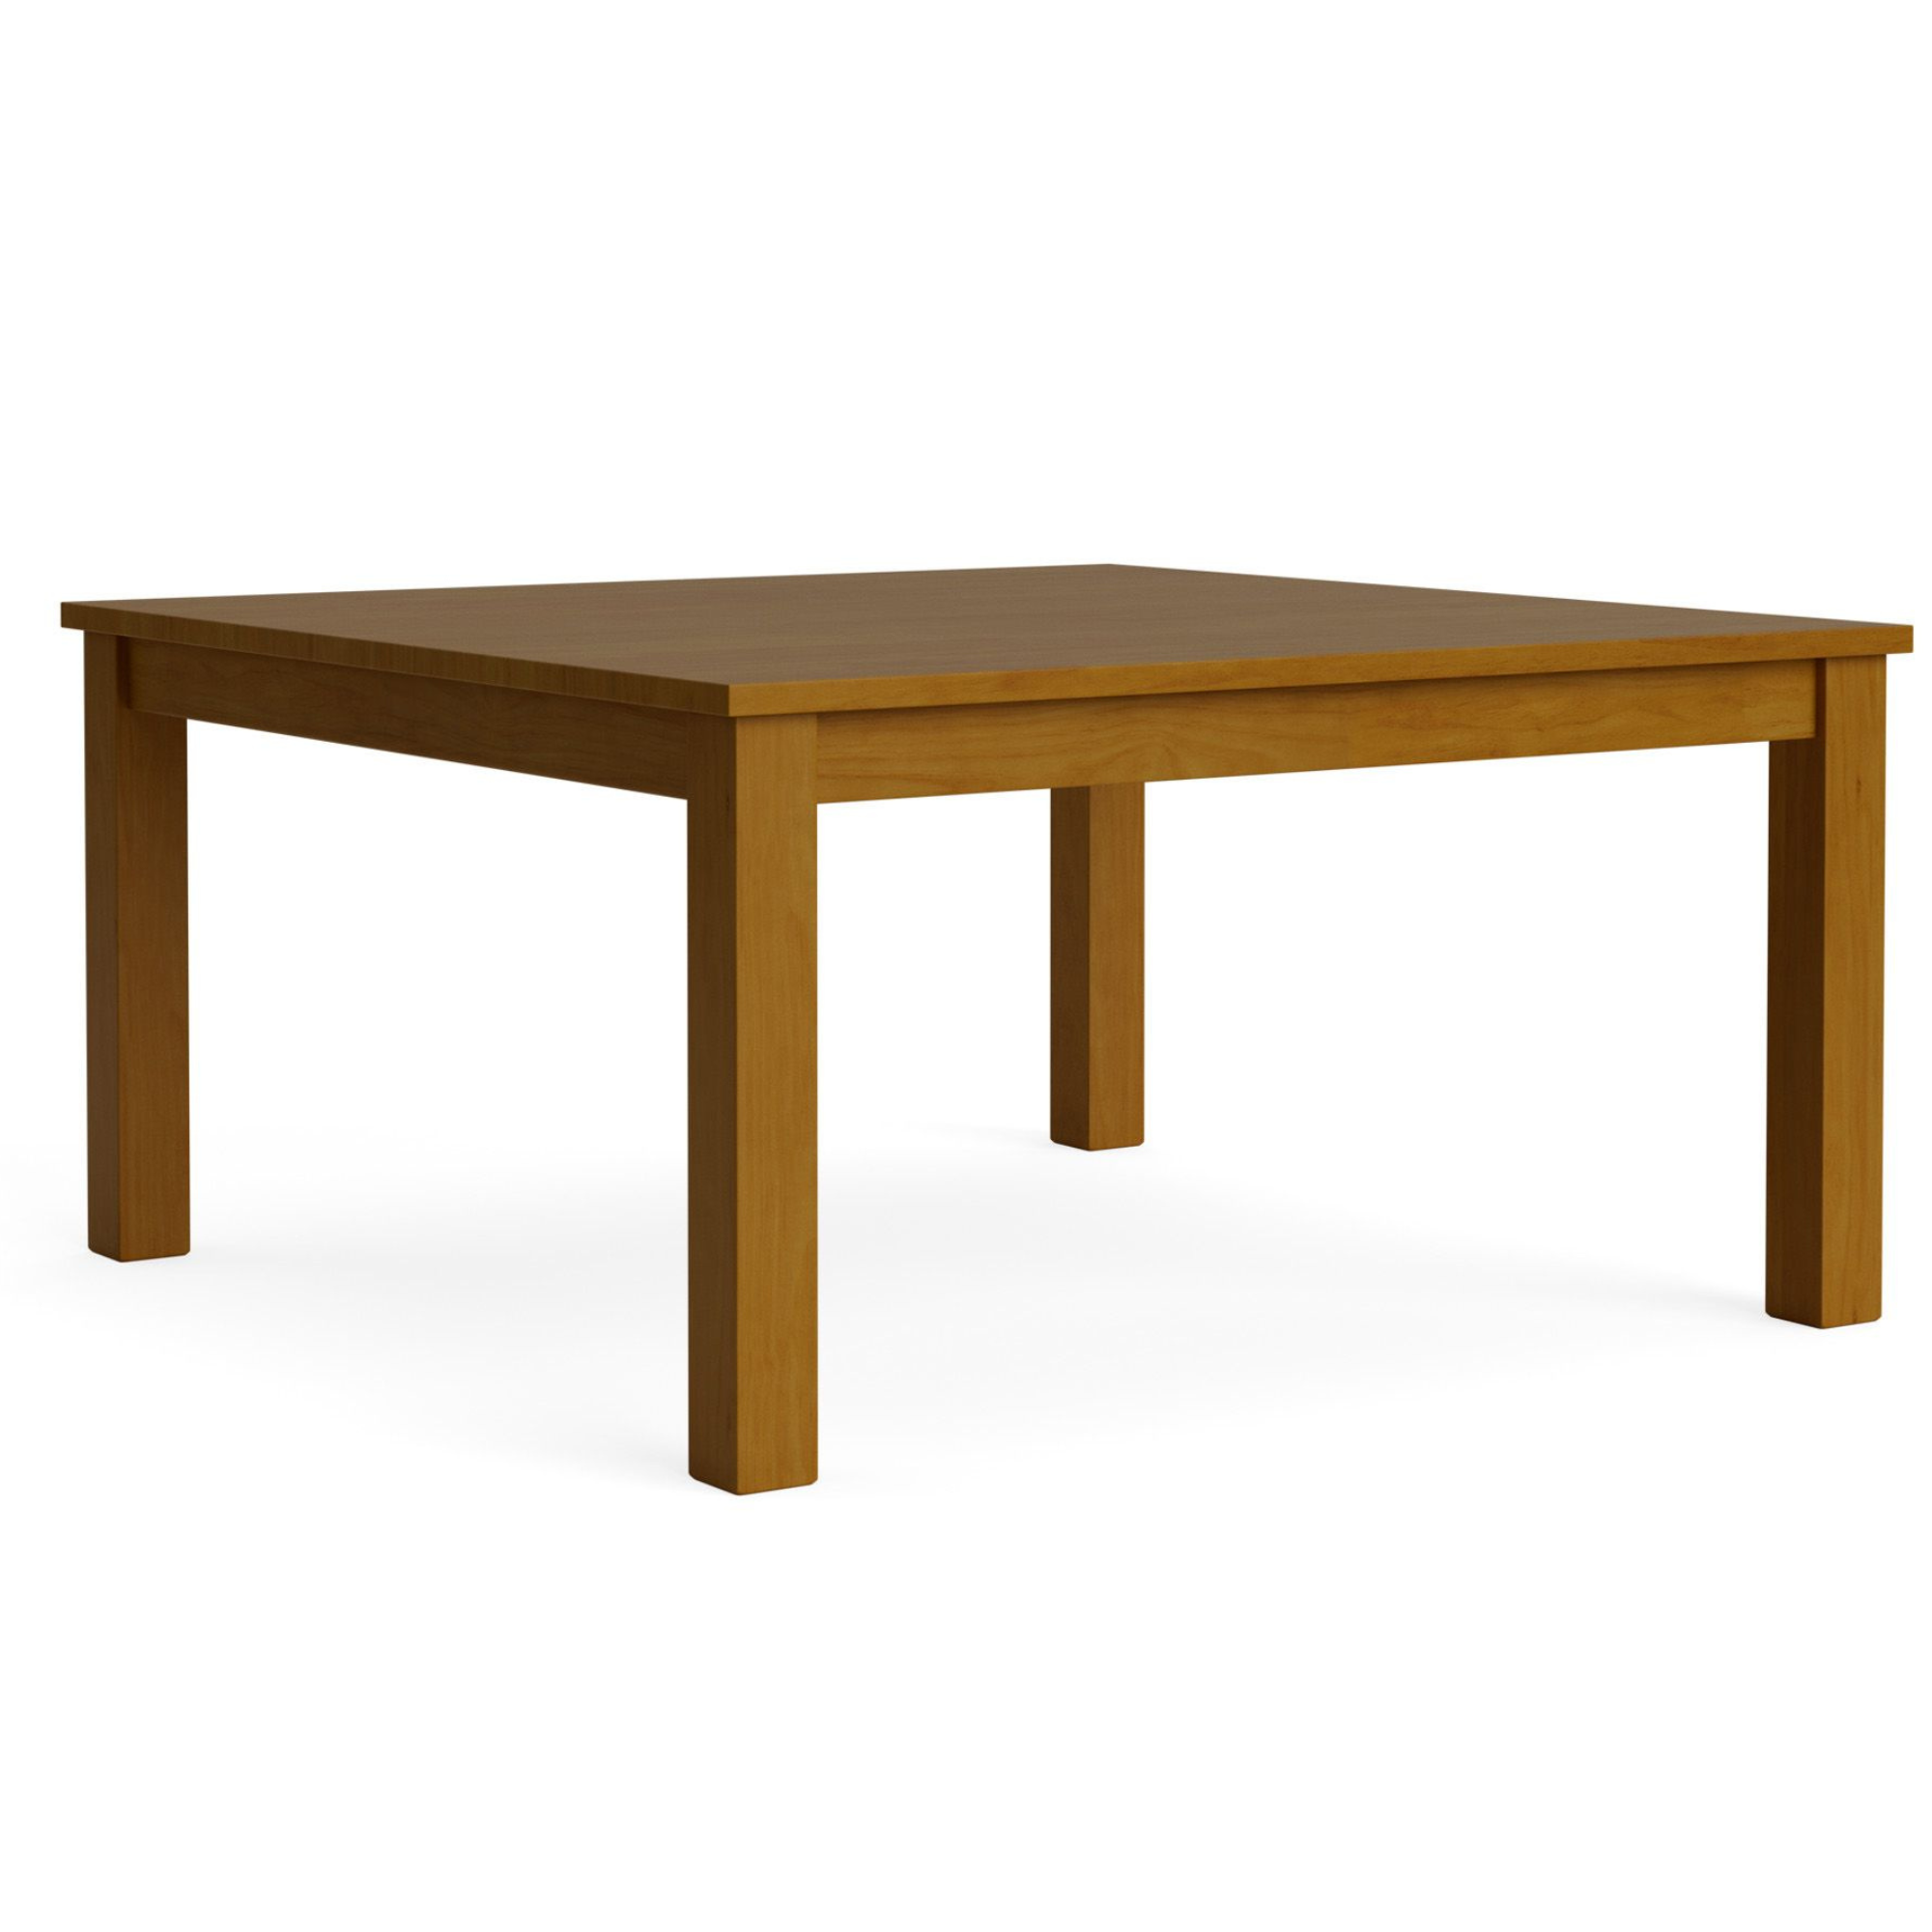 CHARLTON SQUARE 1500 DINING TABLE | NZ MADE